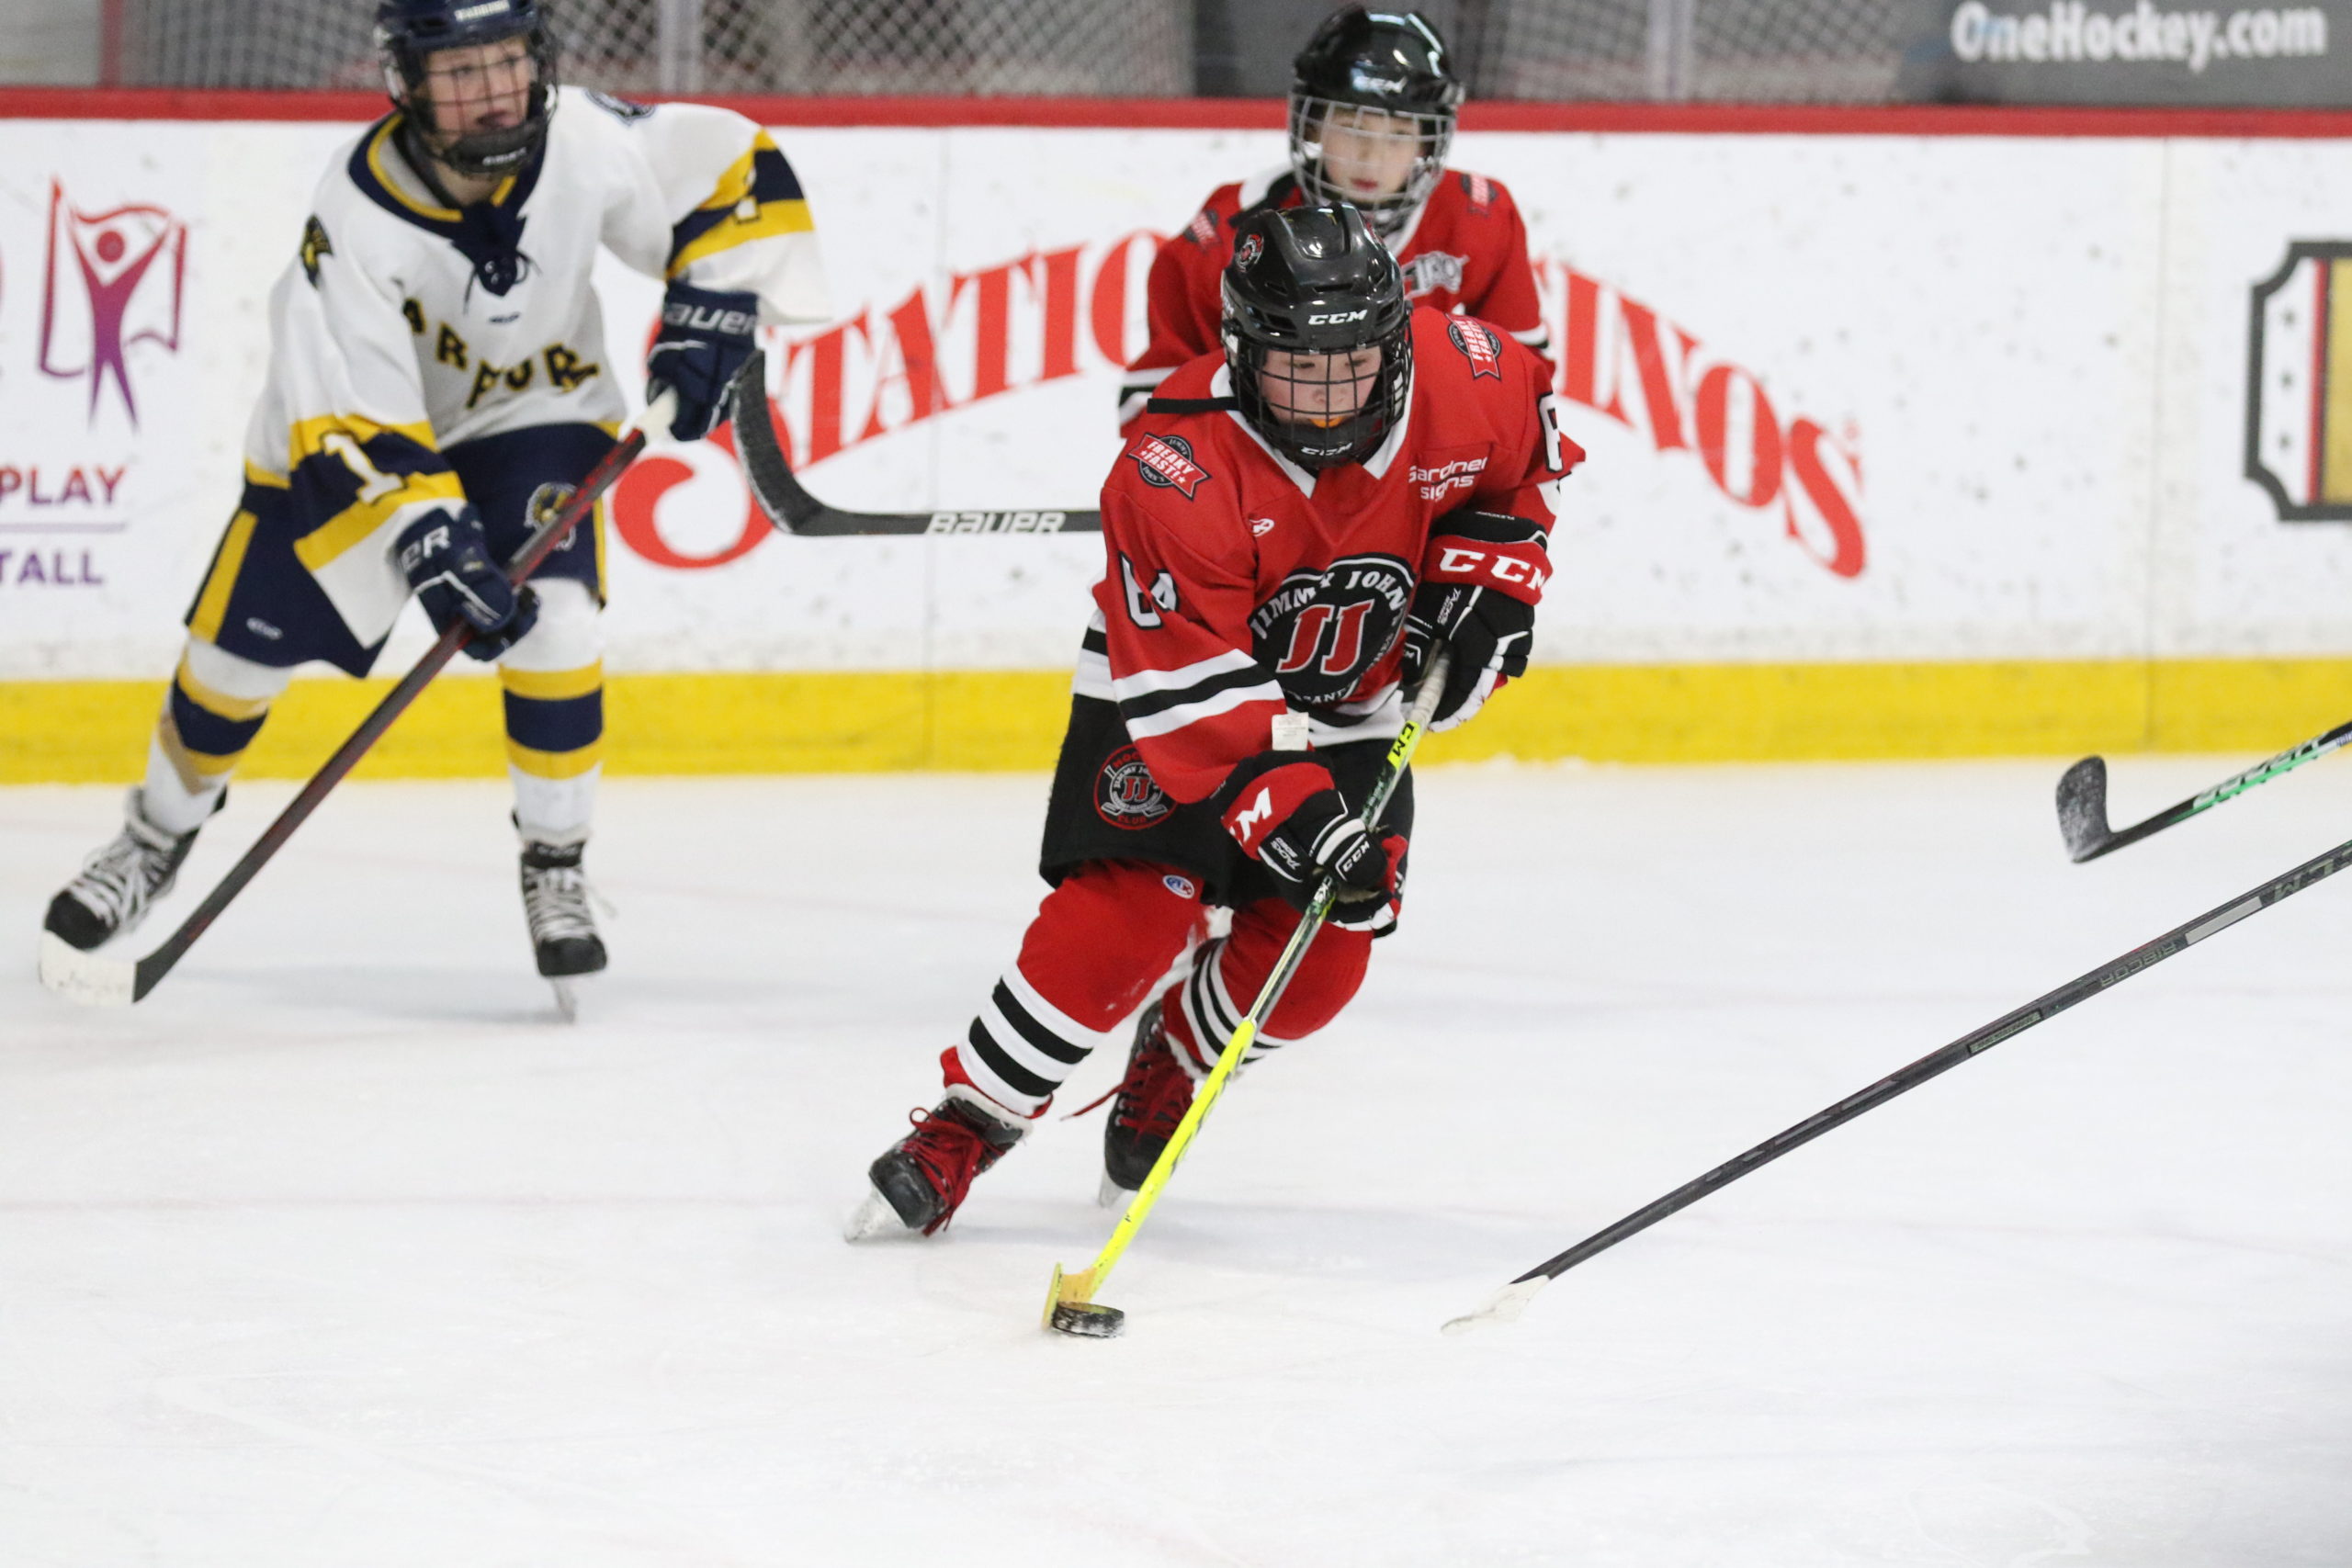 A Jimmy John's hockey player in a red jersey and black shorts stick handles the puck down the ice